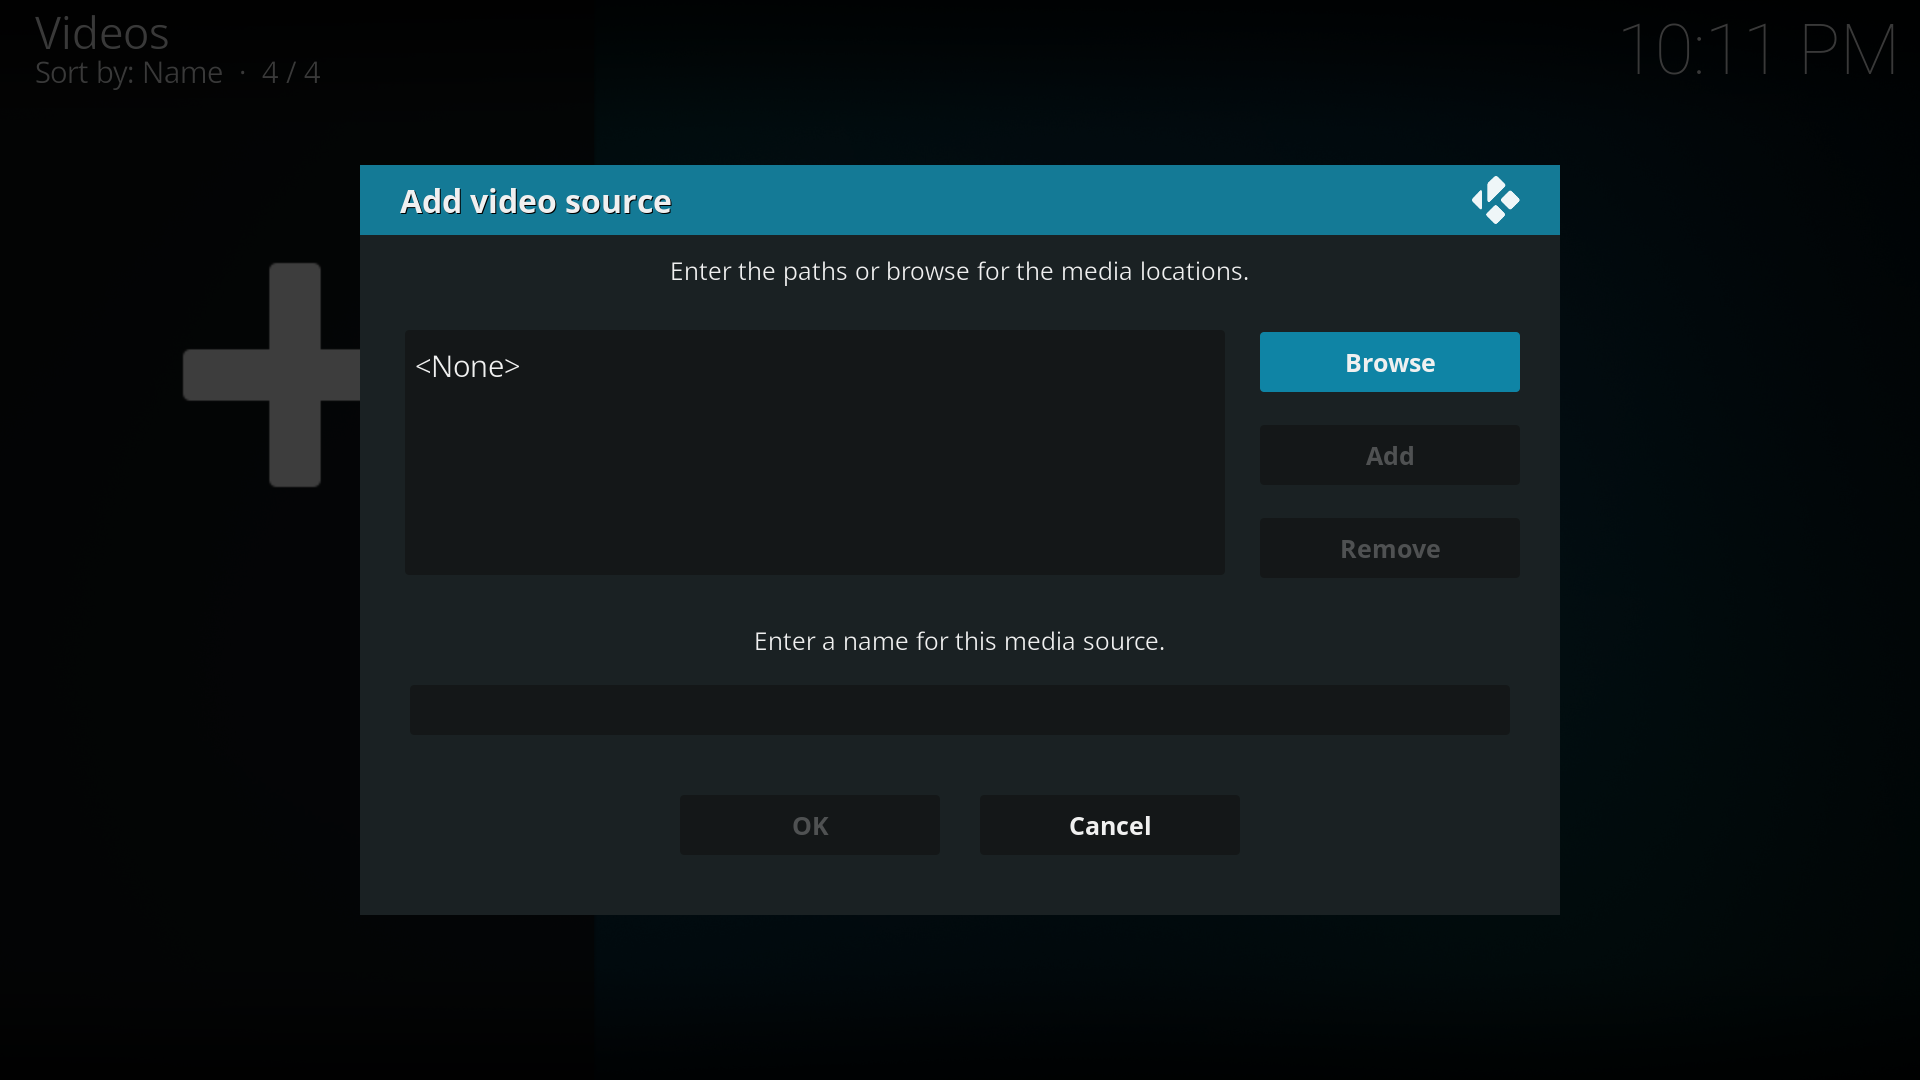 Step 4: Select the BROWSE button from the ADD VIDEO SOURCE window. Note: Network browsing is no longer possible with Samba v2 and upwards. Samba v1 has become deprecated as per May 2018.